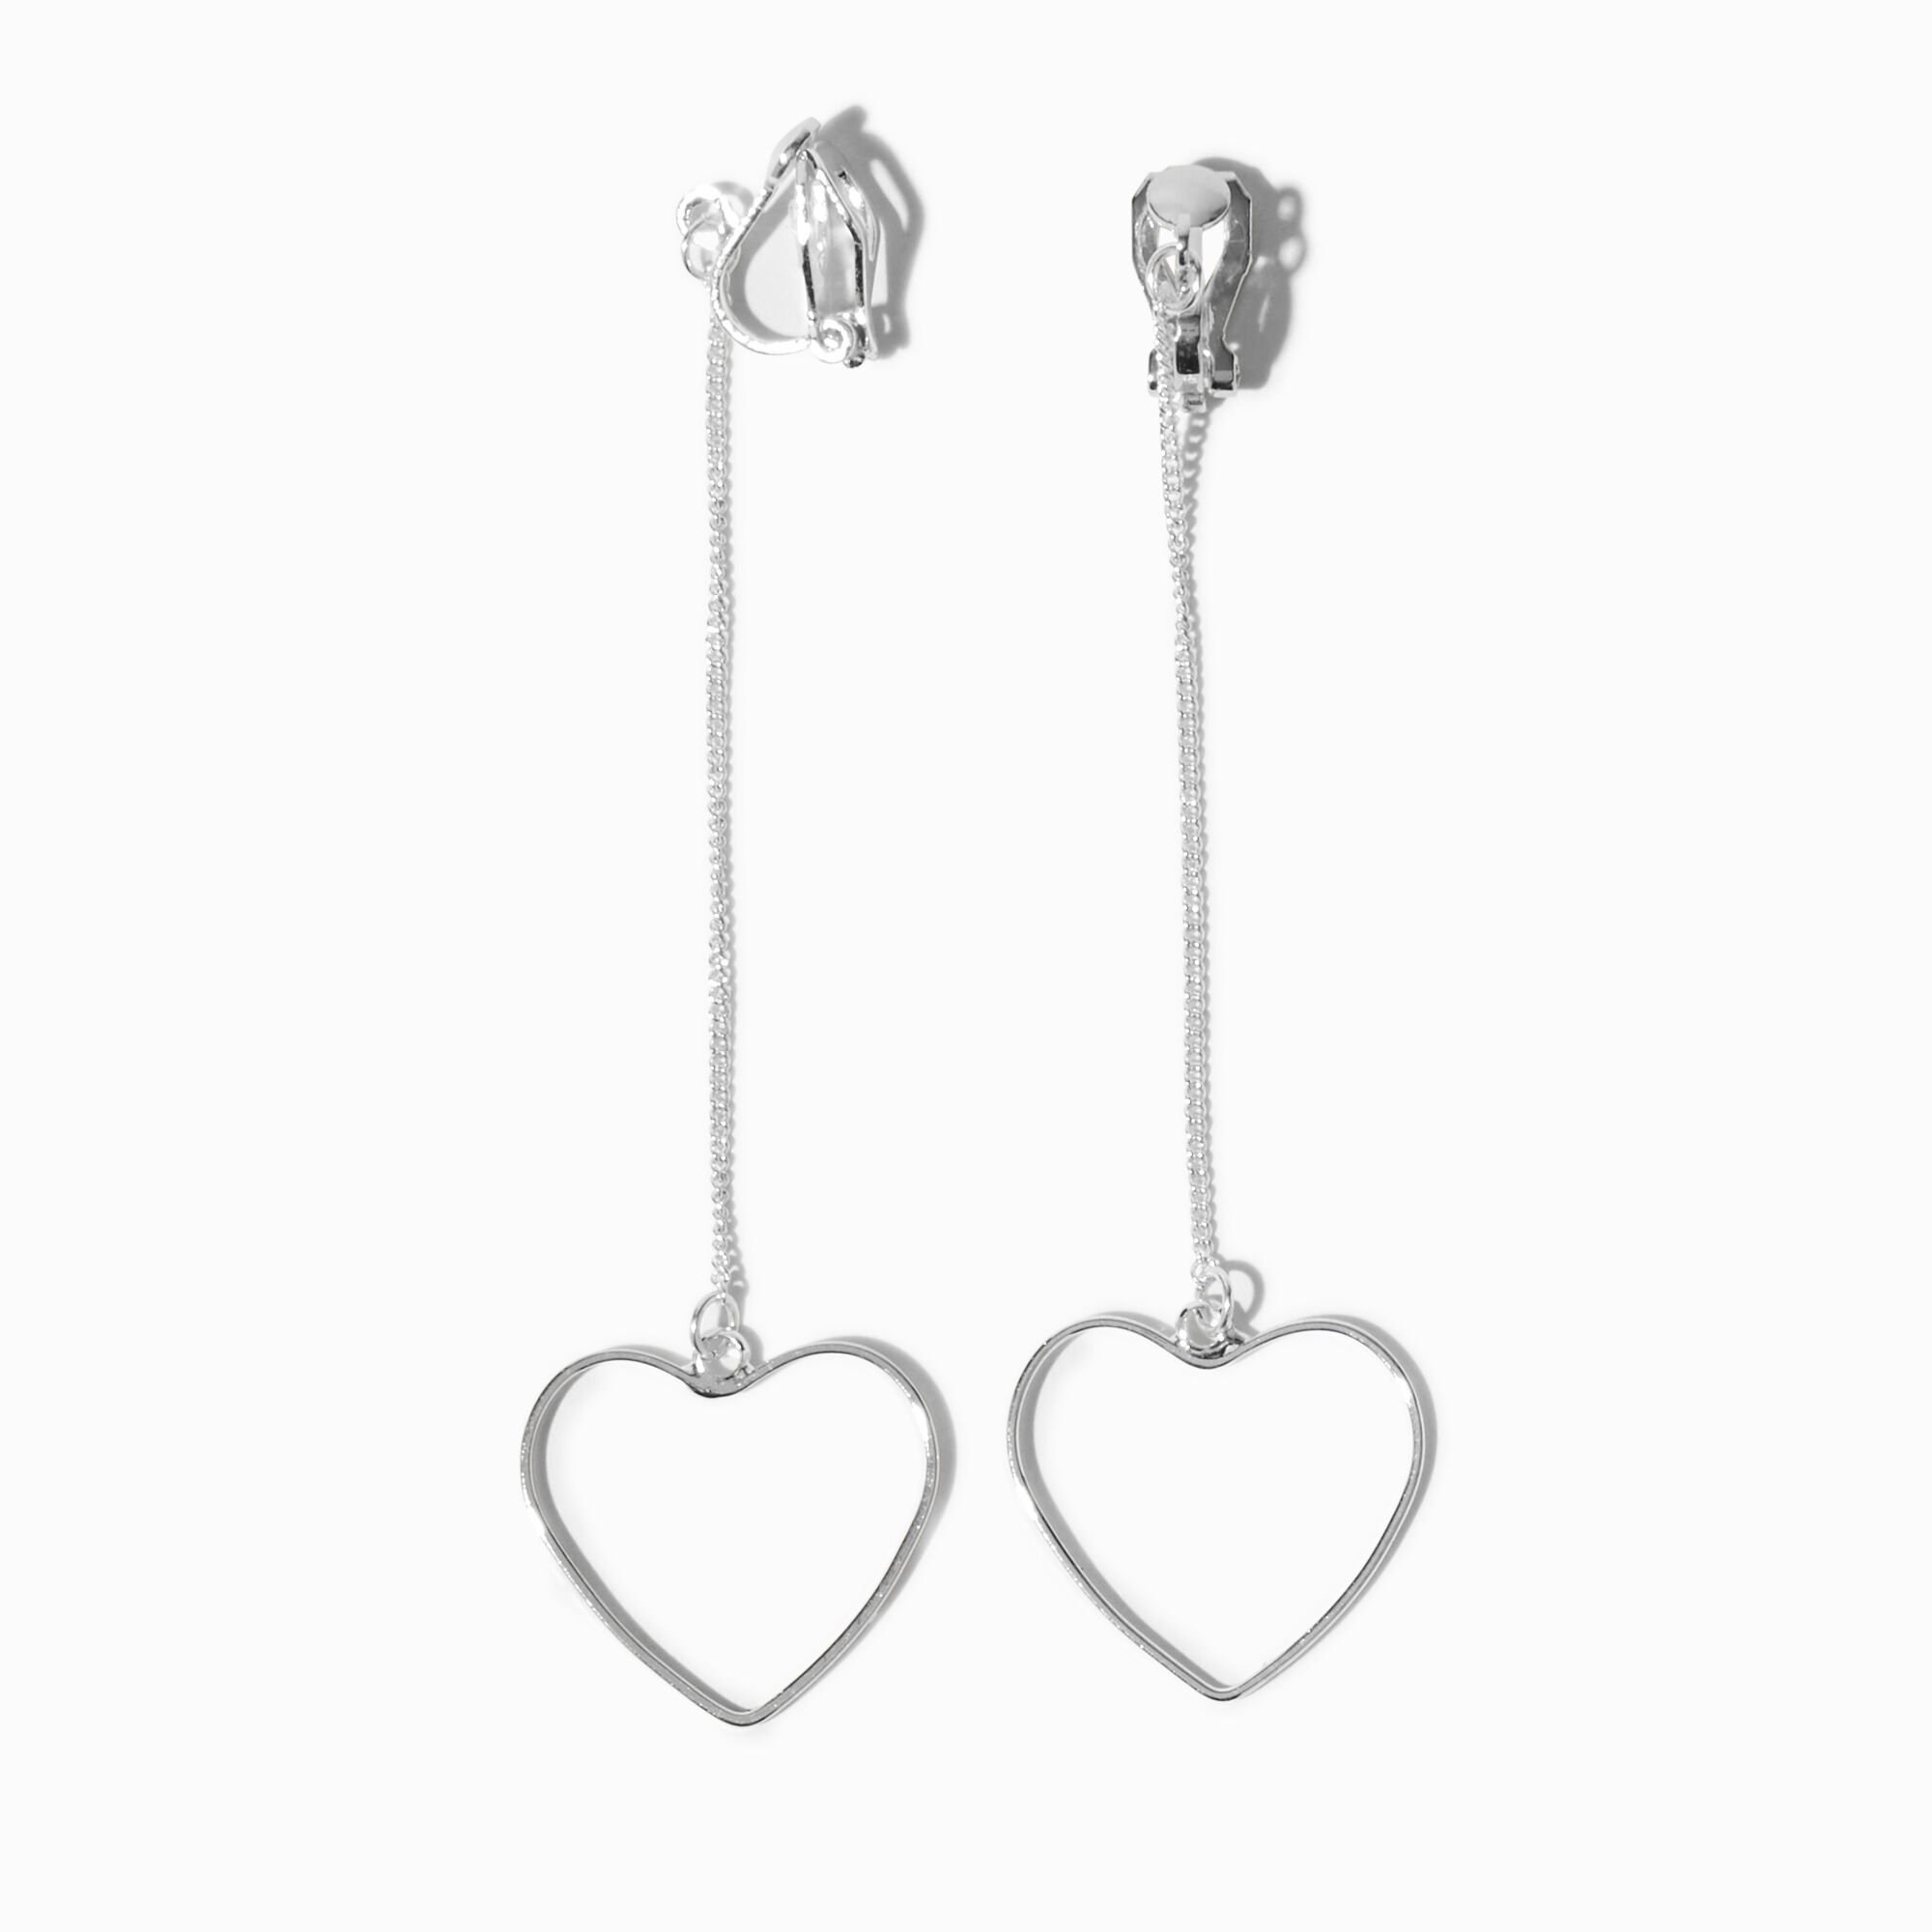 View Claires 3 Heart Linear ClipOn Drop Earrings Silver information